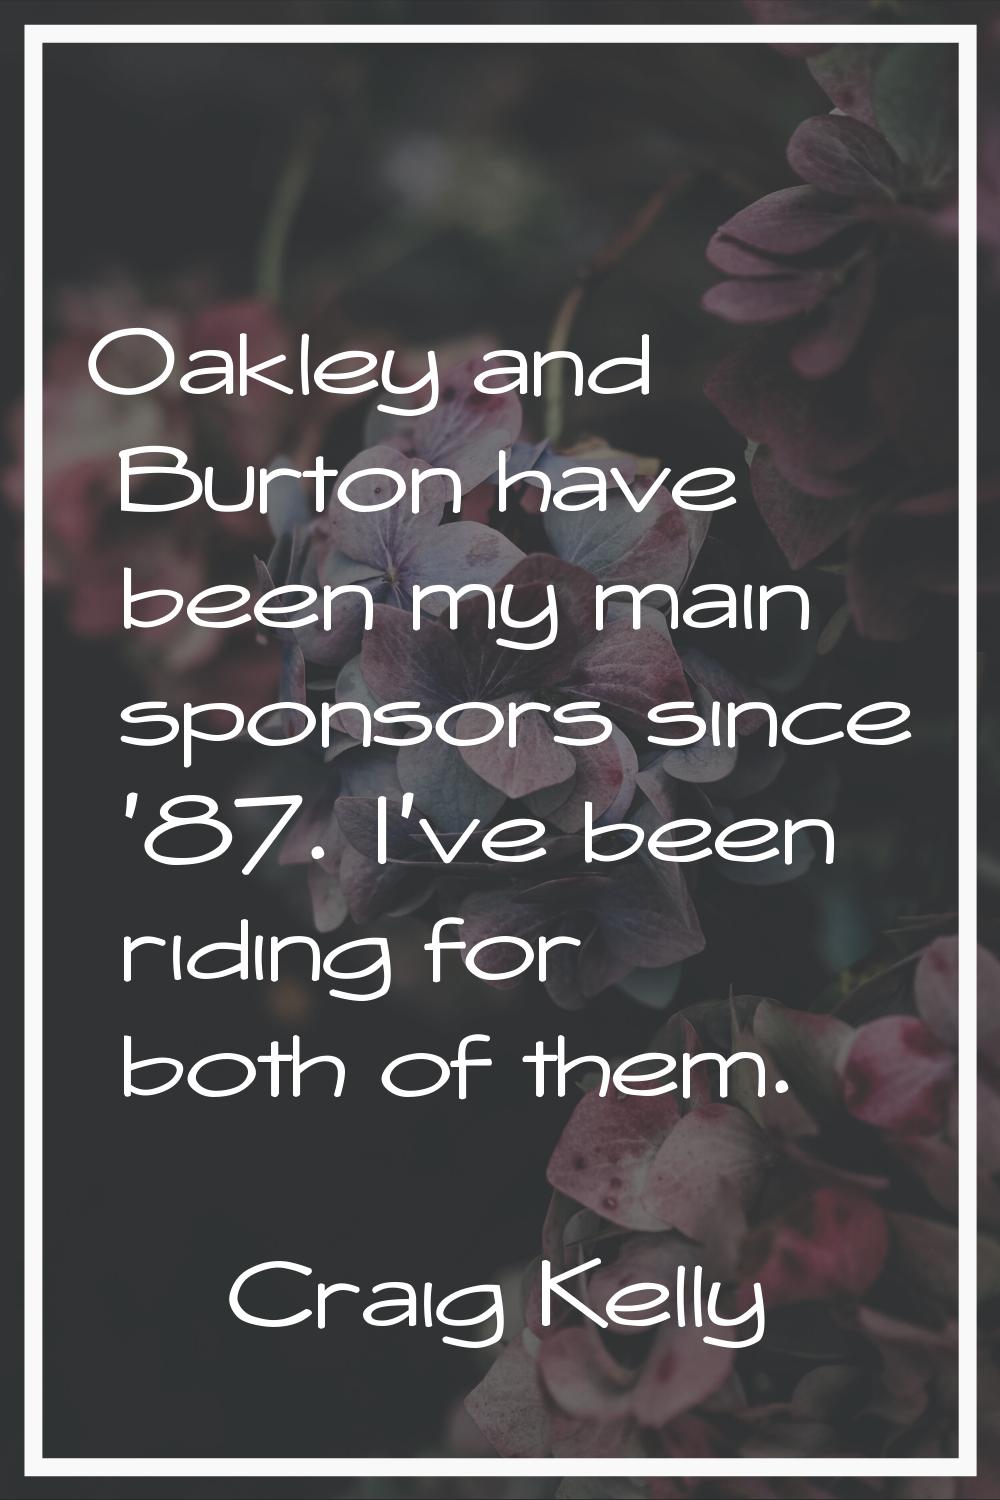 Oakley and Burton have been my main sponsors since '87. I've been riding for both of them.